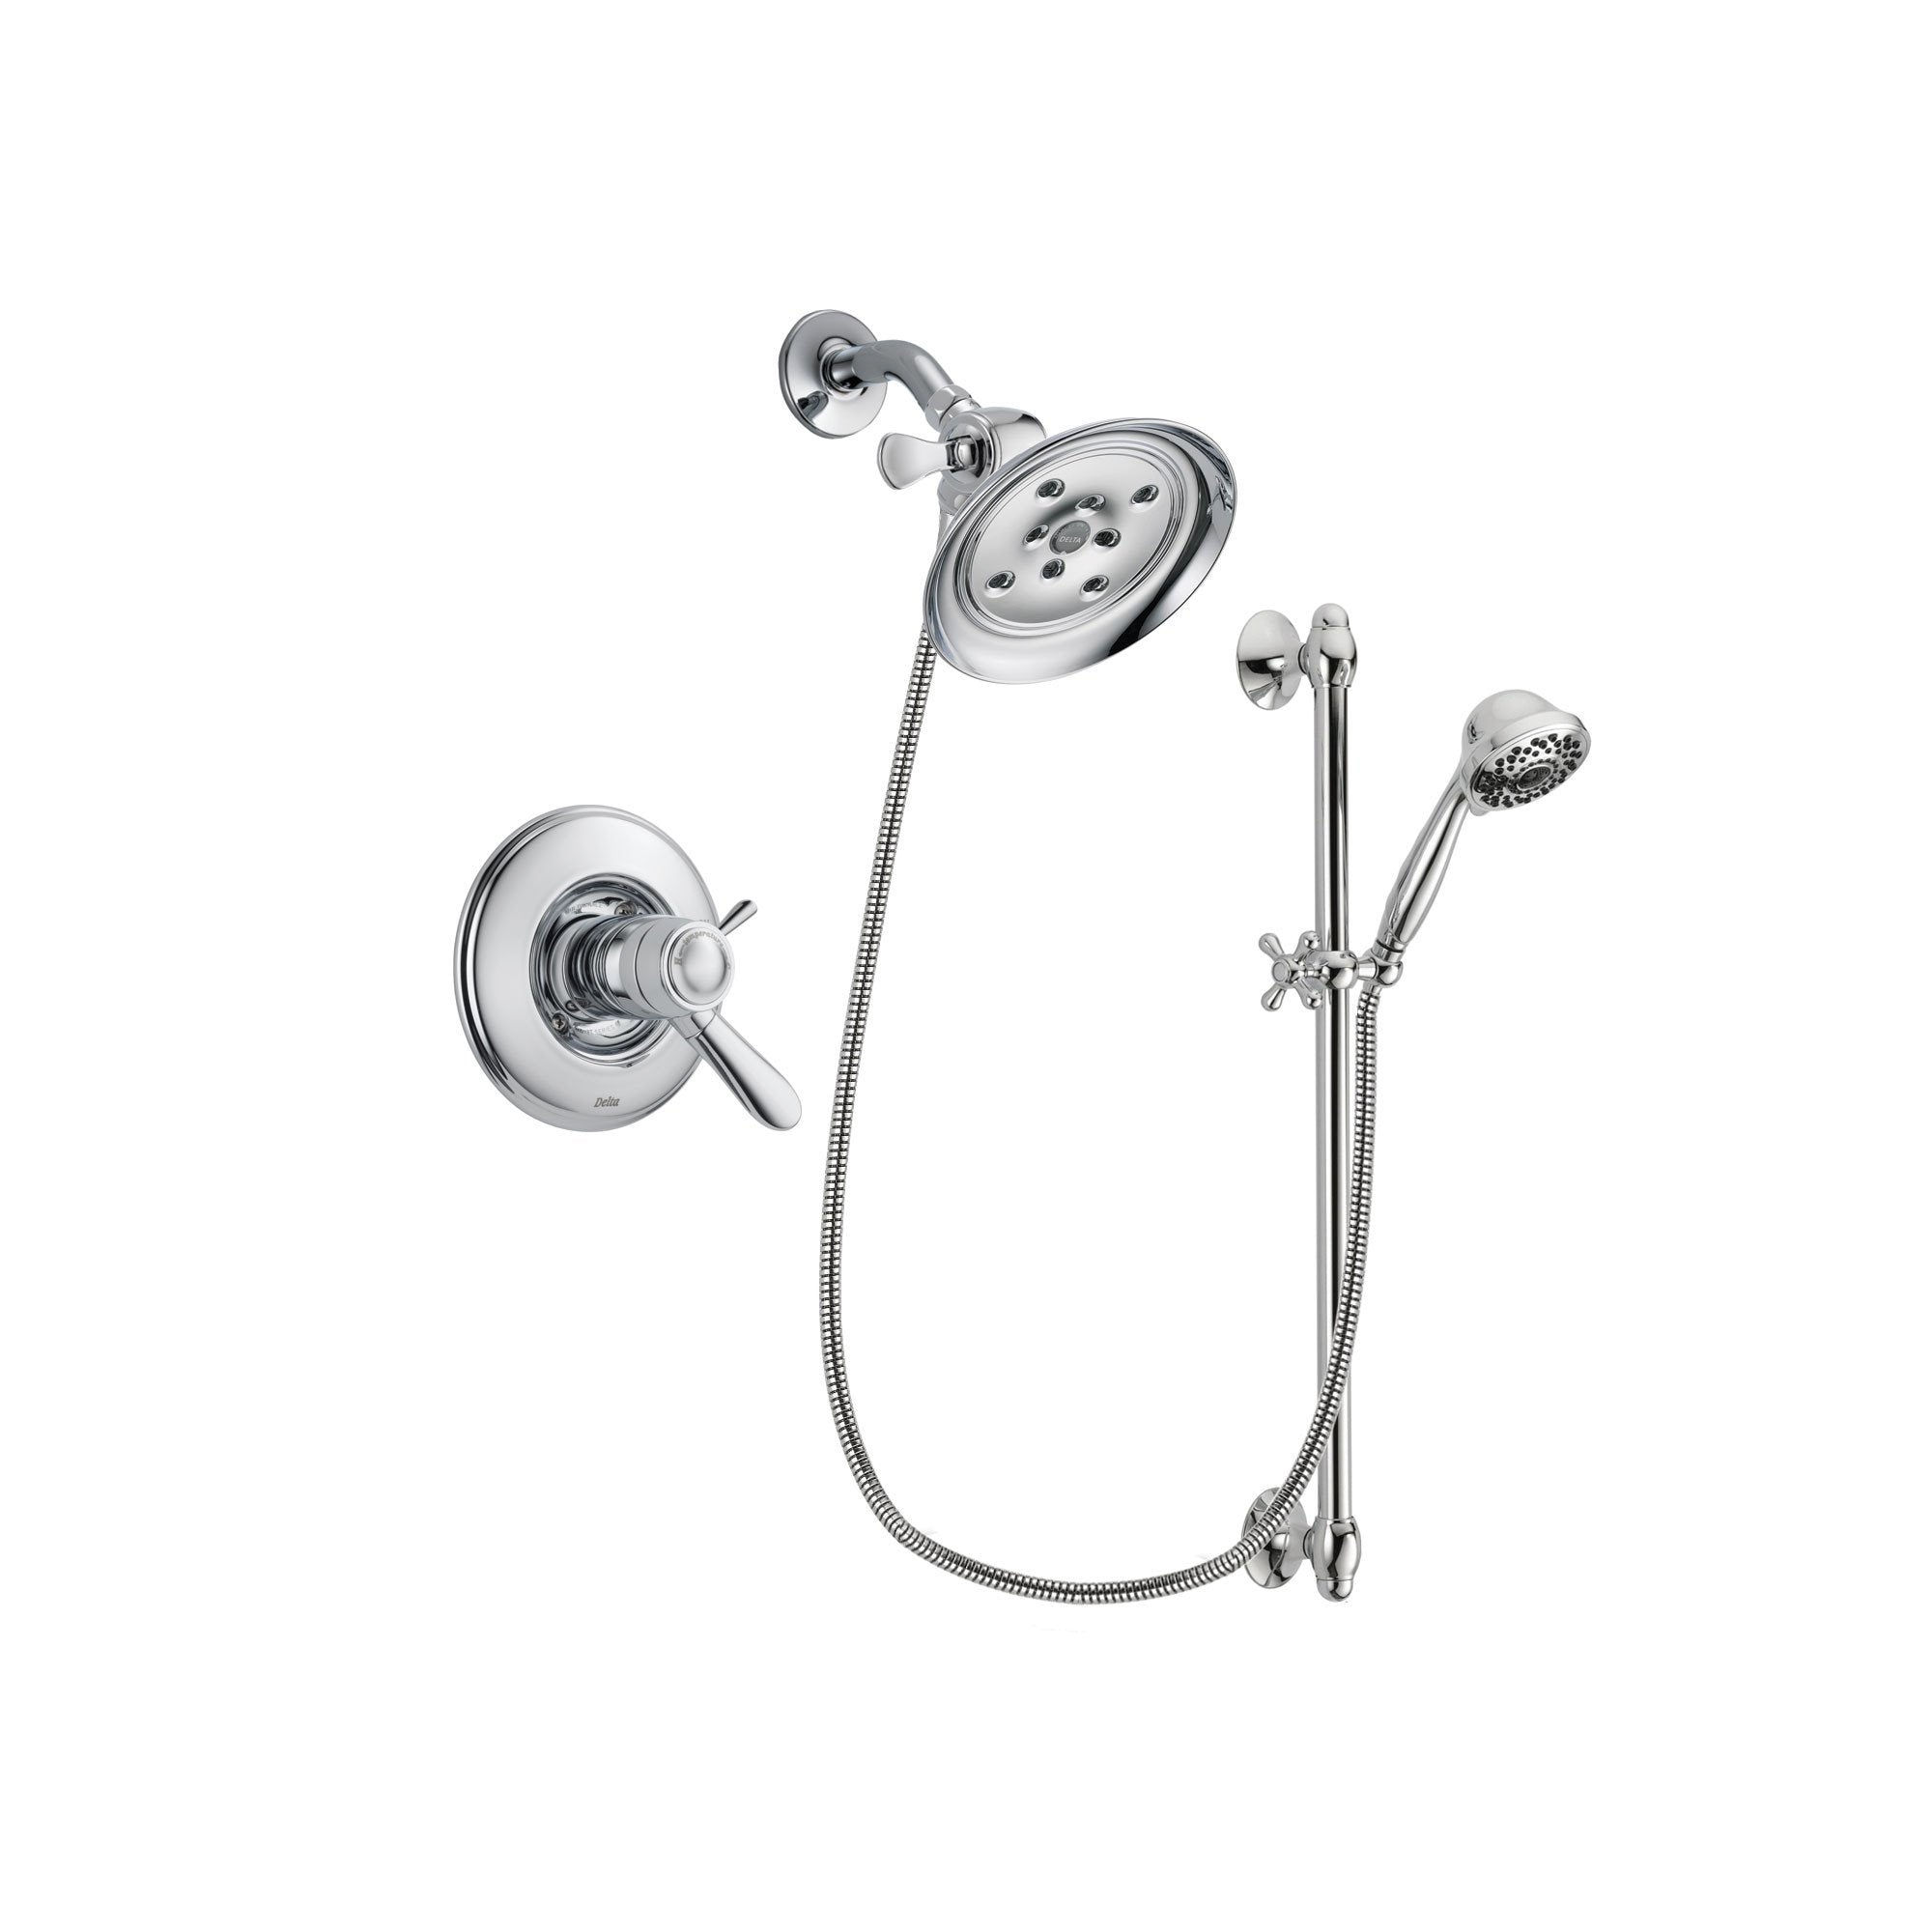 Delta Lahara Chrome Shower Faucet System w/ Shower Head and Hand Shower DSP0630V